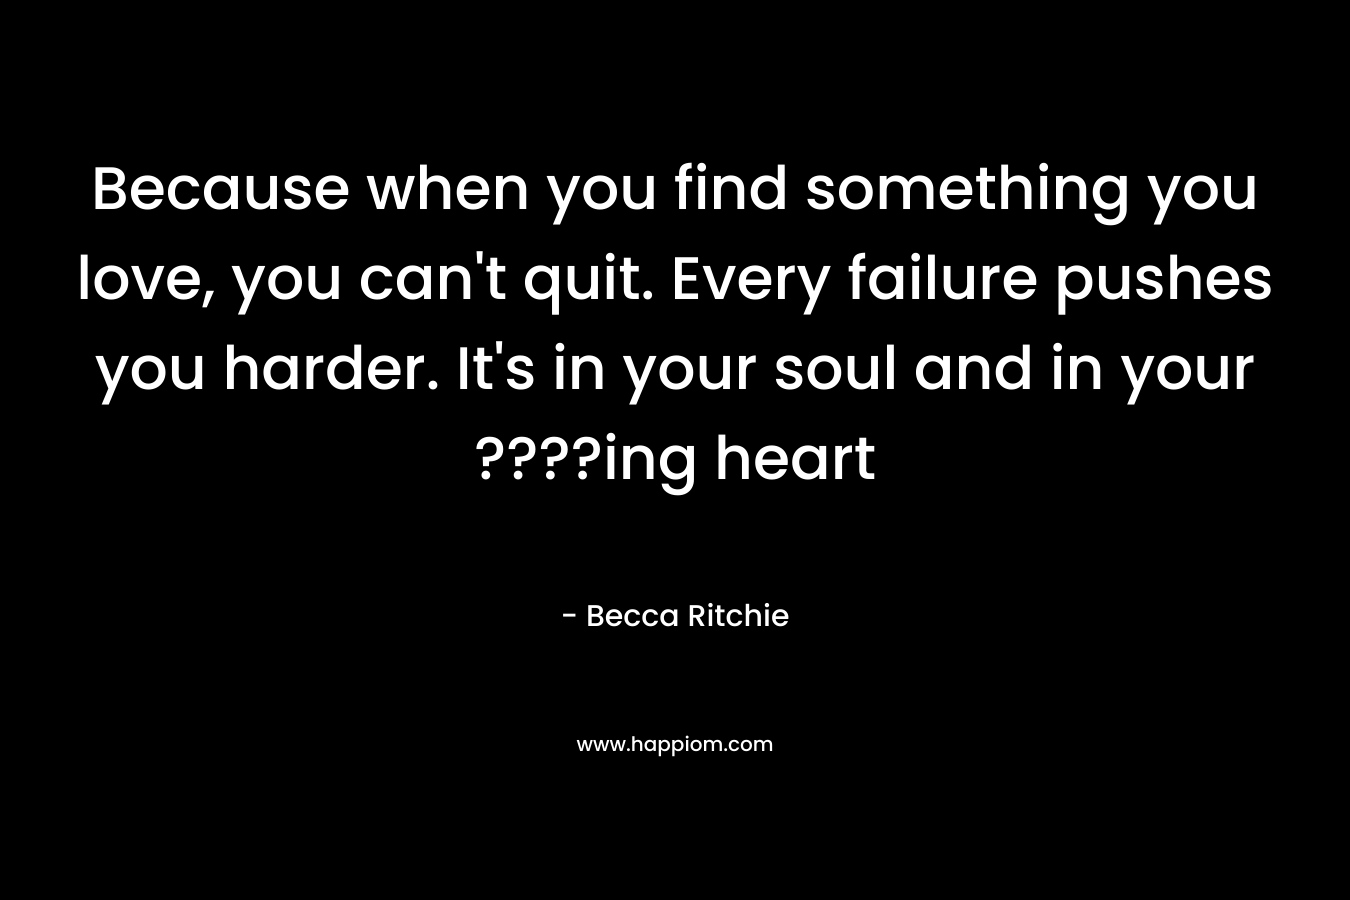 Because when you find something you love, you can’t quit. Every failure pushes you harder. It’s in your soul and in your ????ing heart – Becca Ritchie